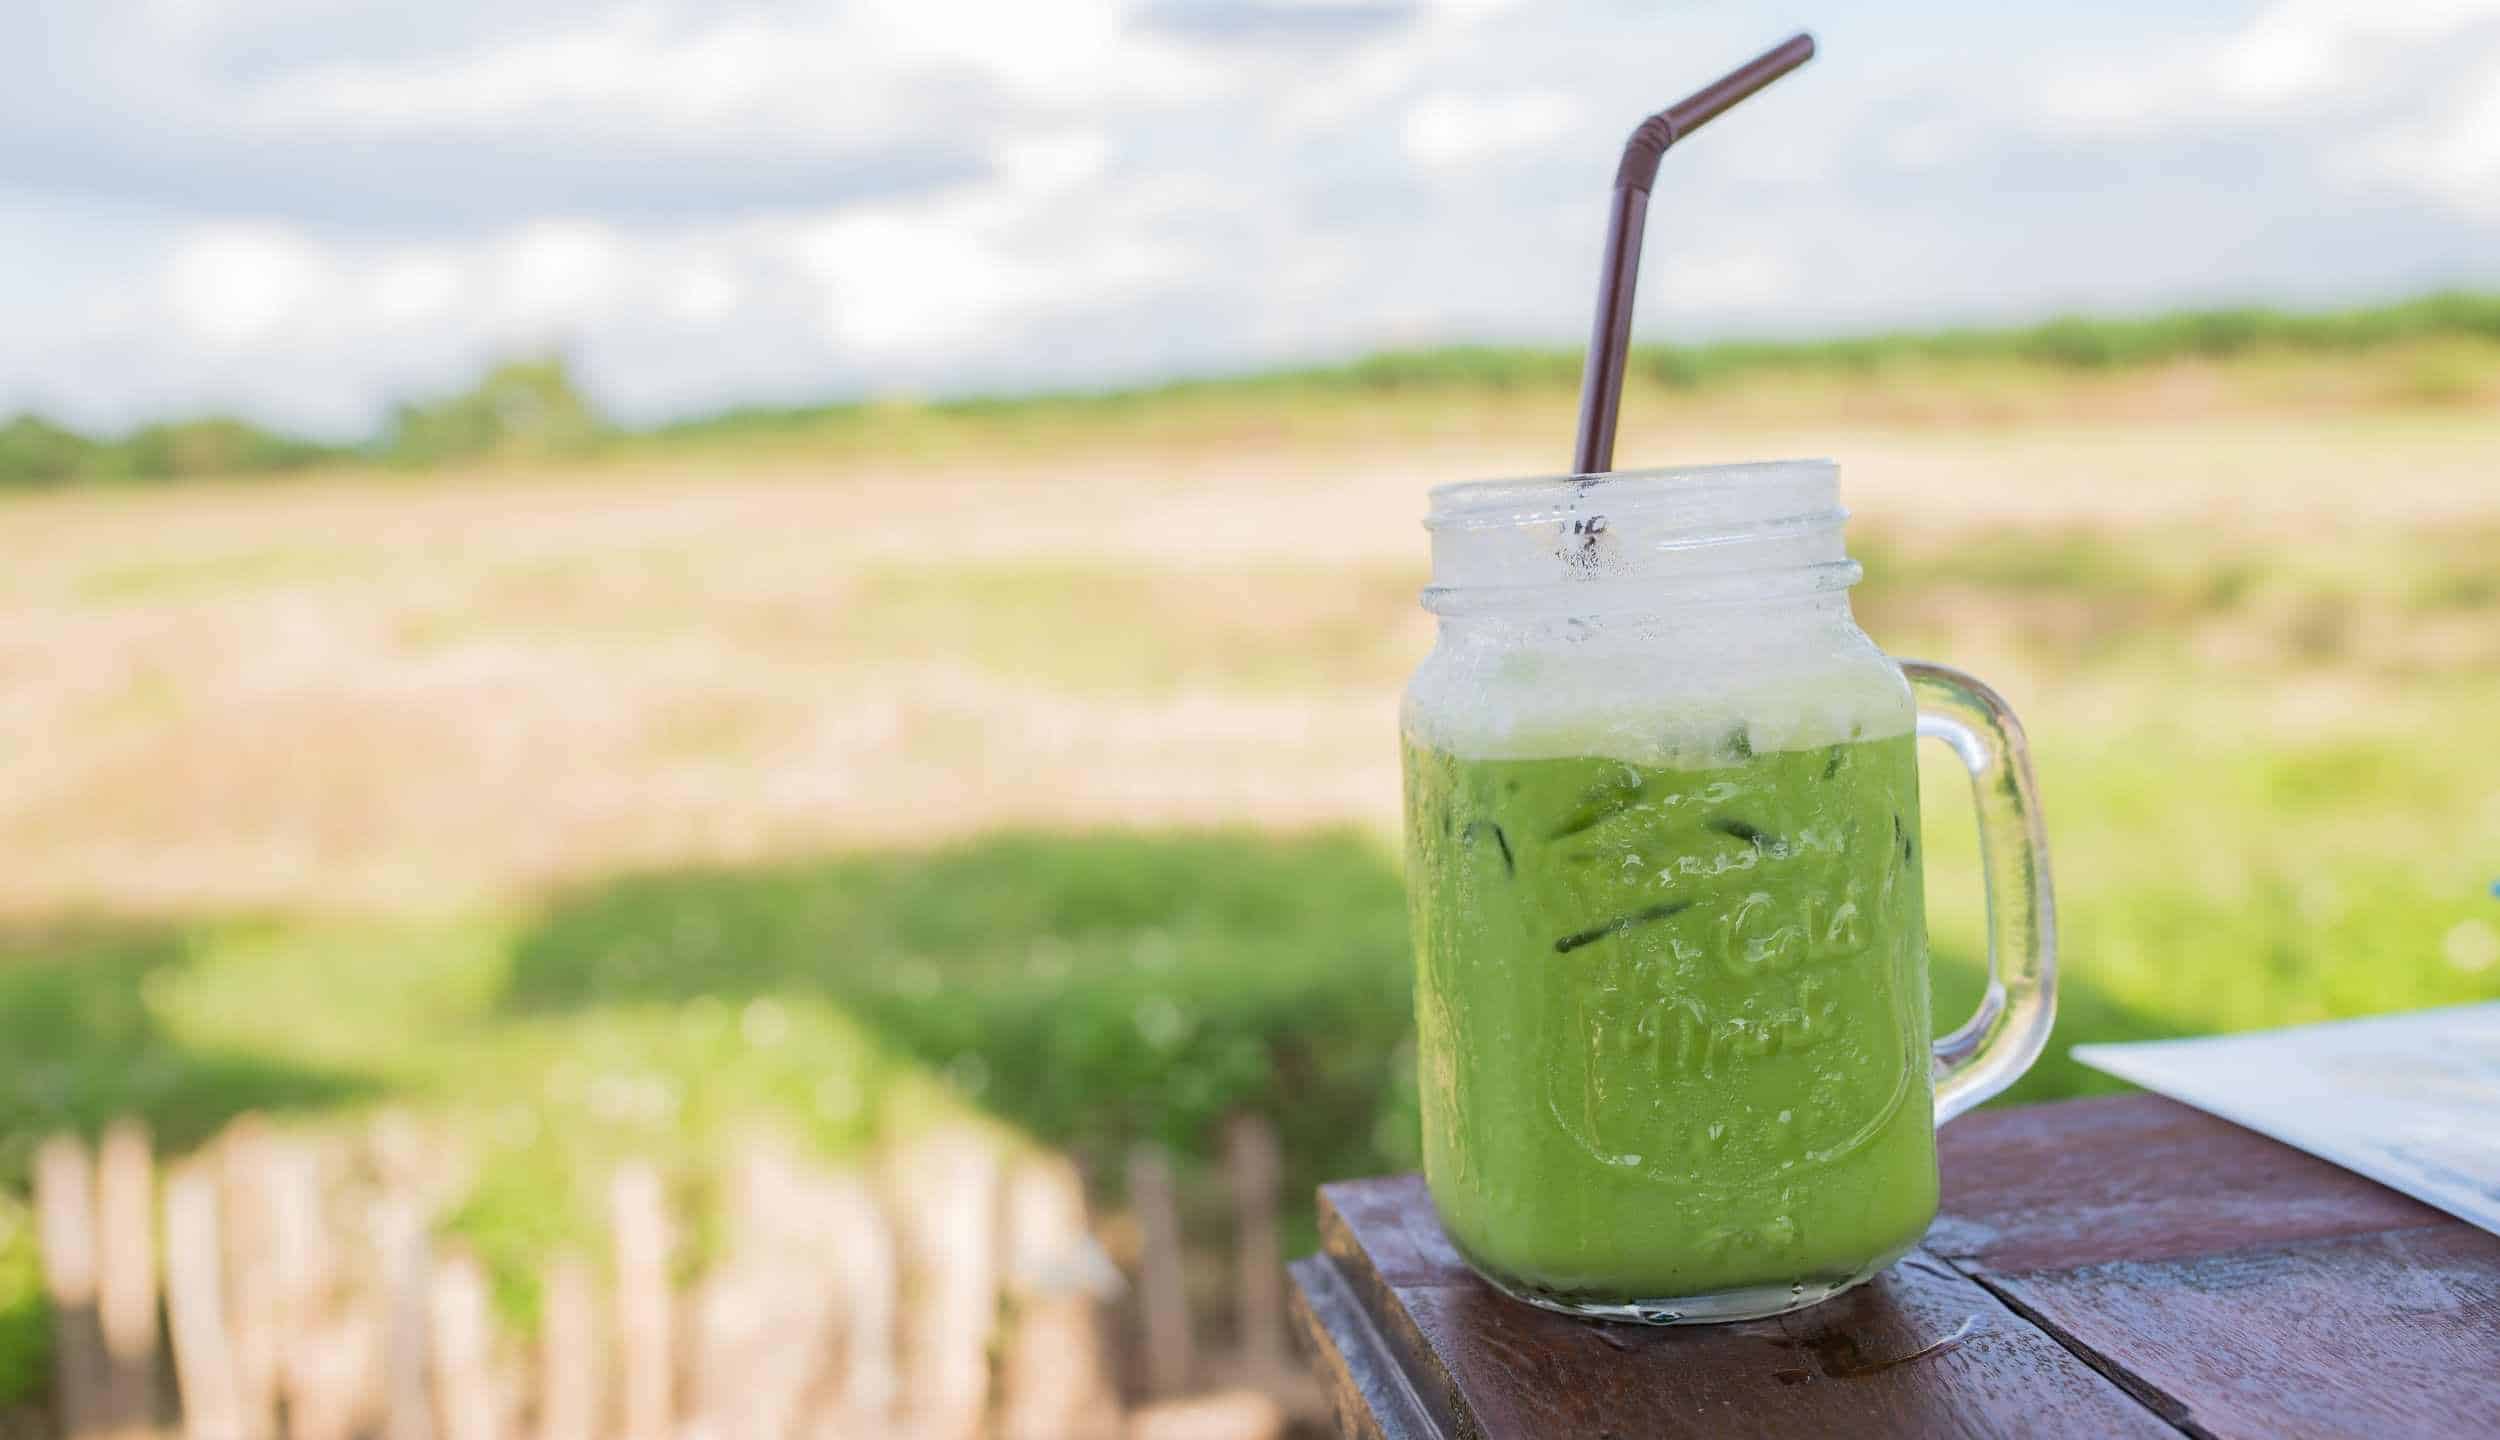 Try Our TB12 Green “Tee” Smoothie